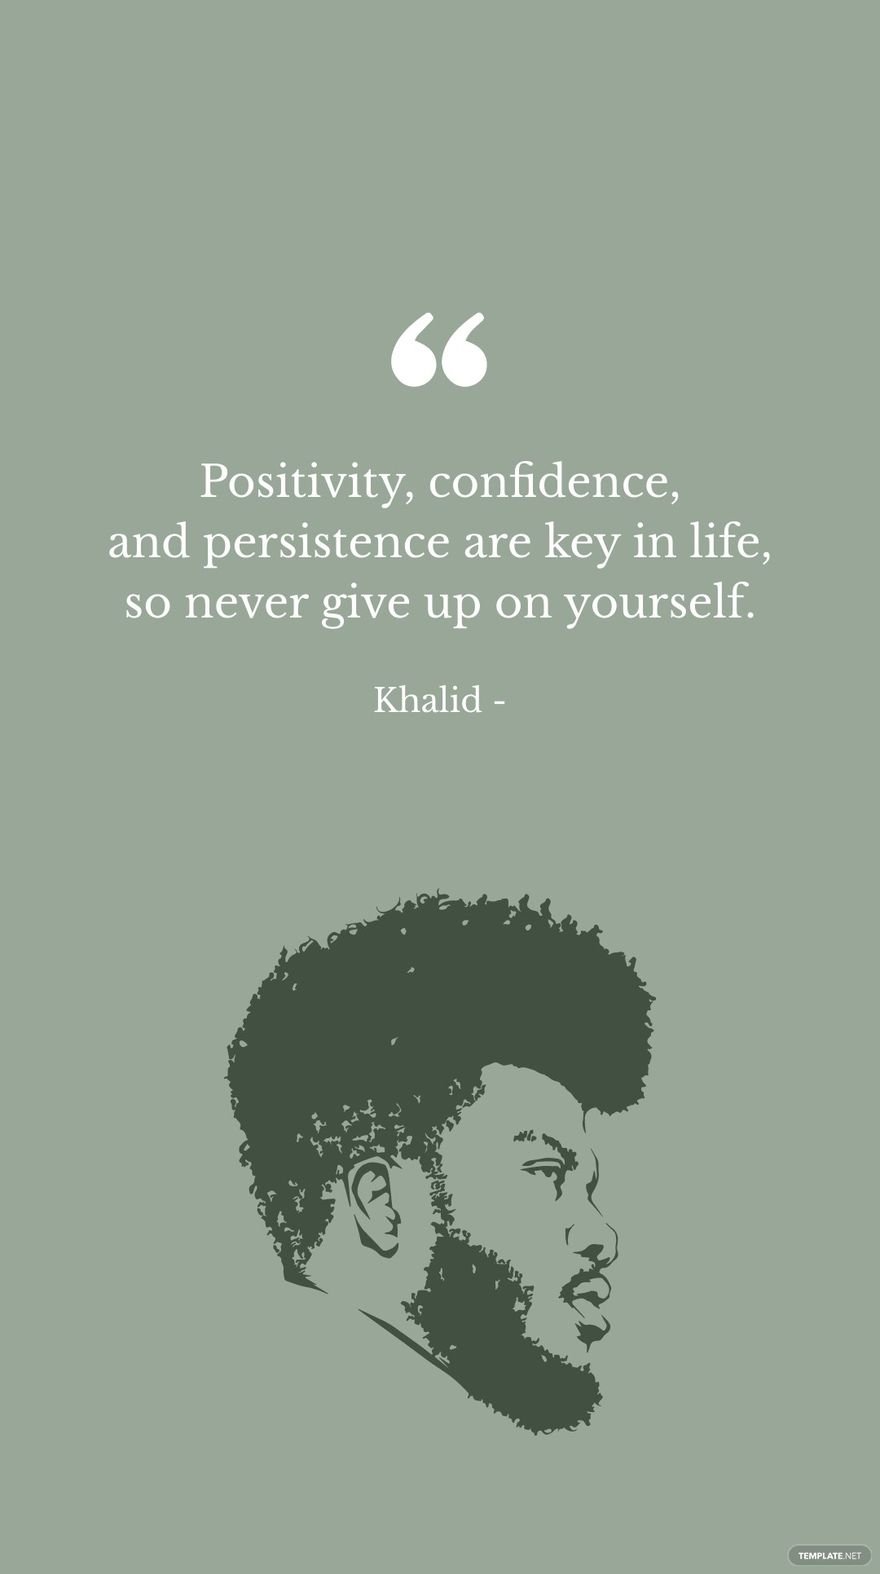 Khalid - Positivity, confidence, and persistence are key in life, so never give up on yourself. in JPG